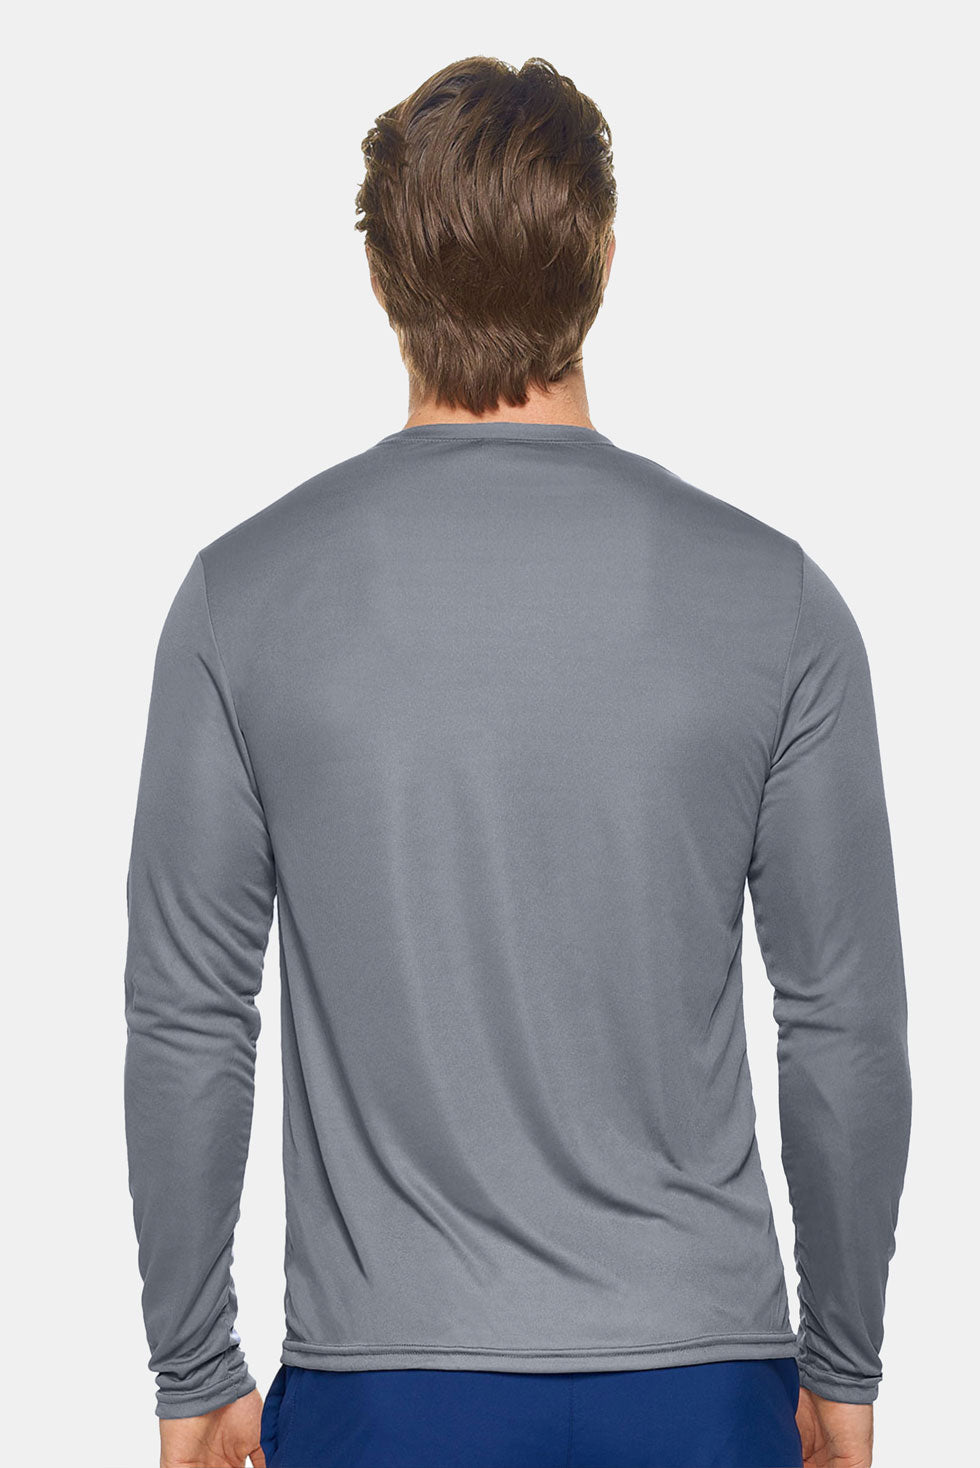 Expert Brand Apparel Men's DriMax Long Sleeve Tech Tee Made in USA AI901D Steel image 3#color_steel